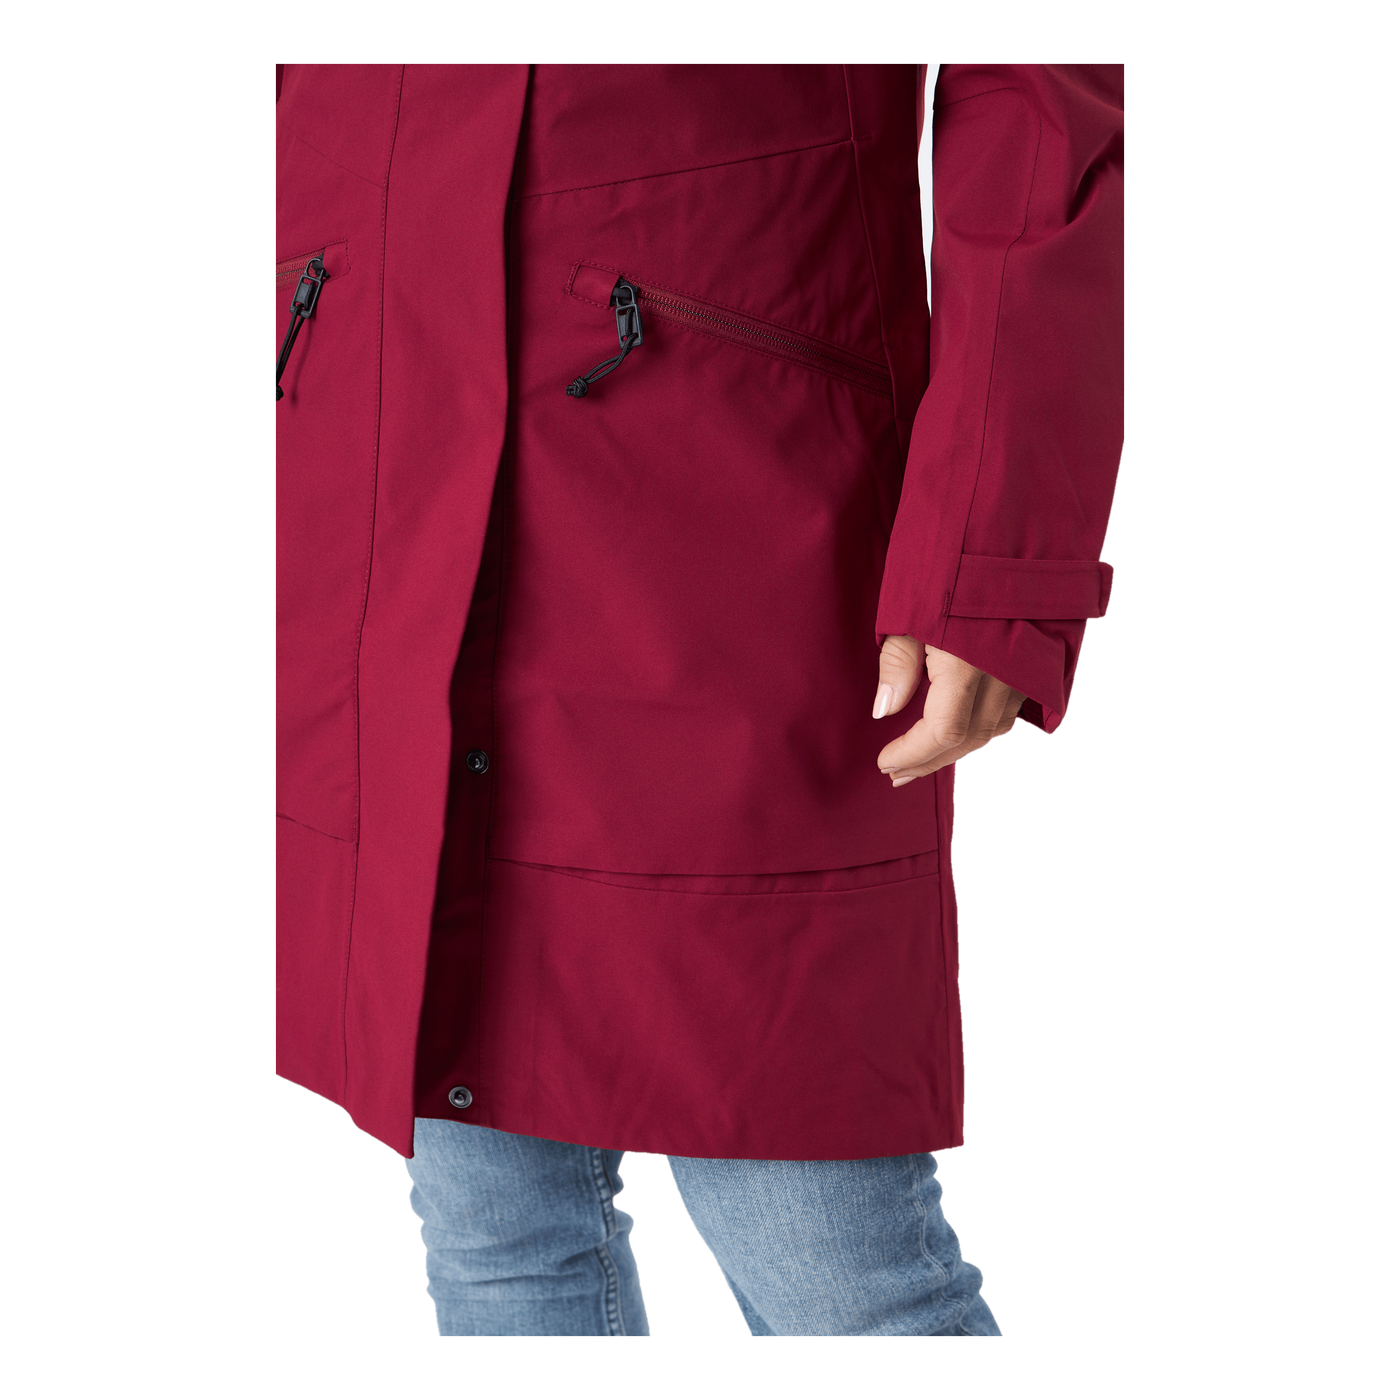 Ilma Wns Parka 6 Red